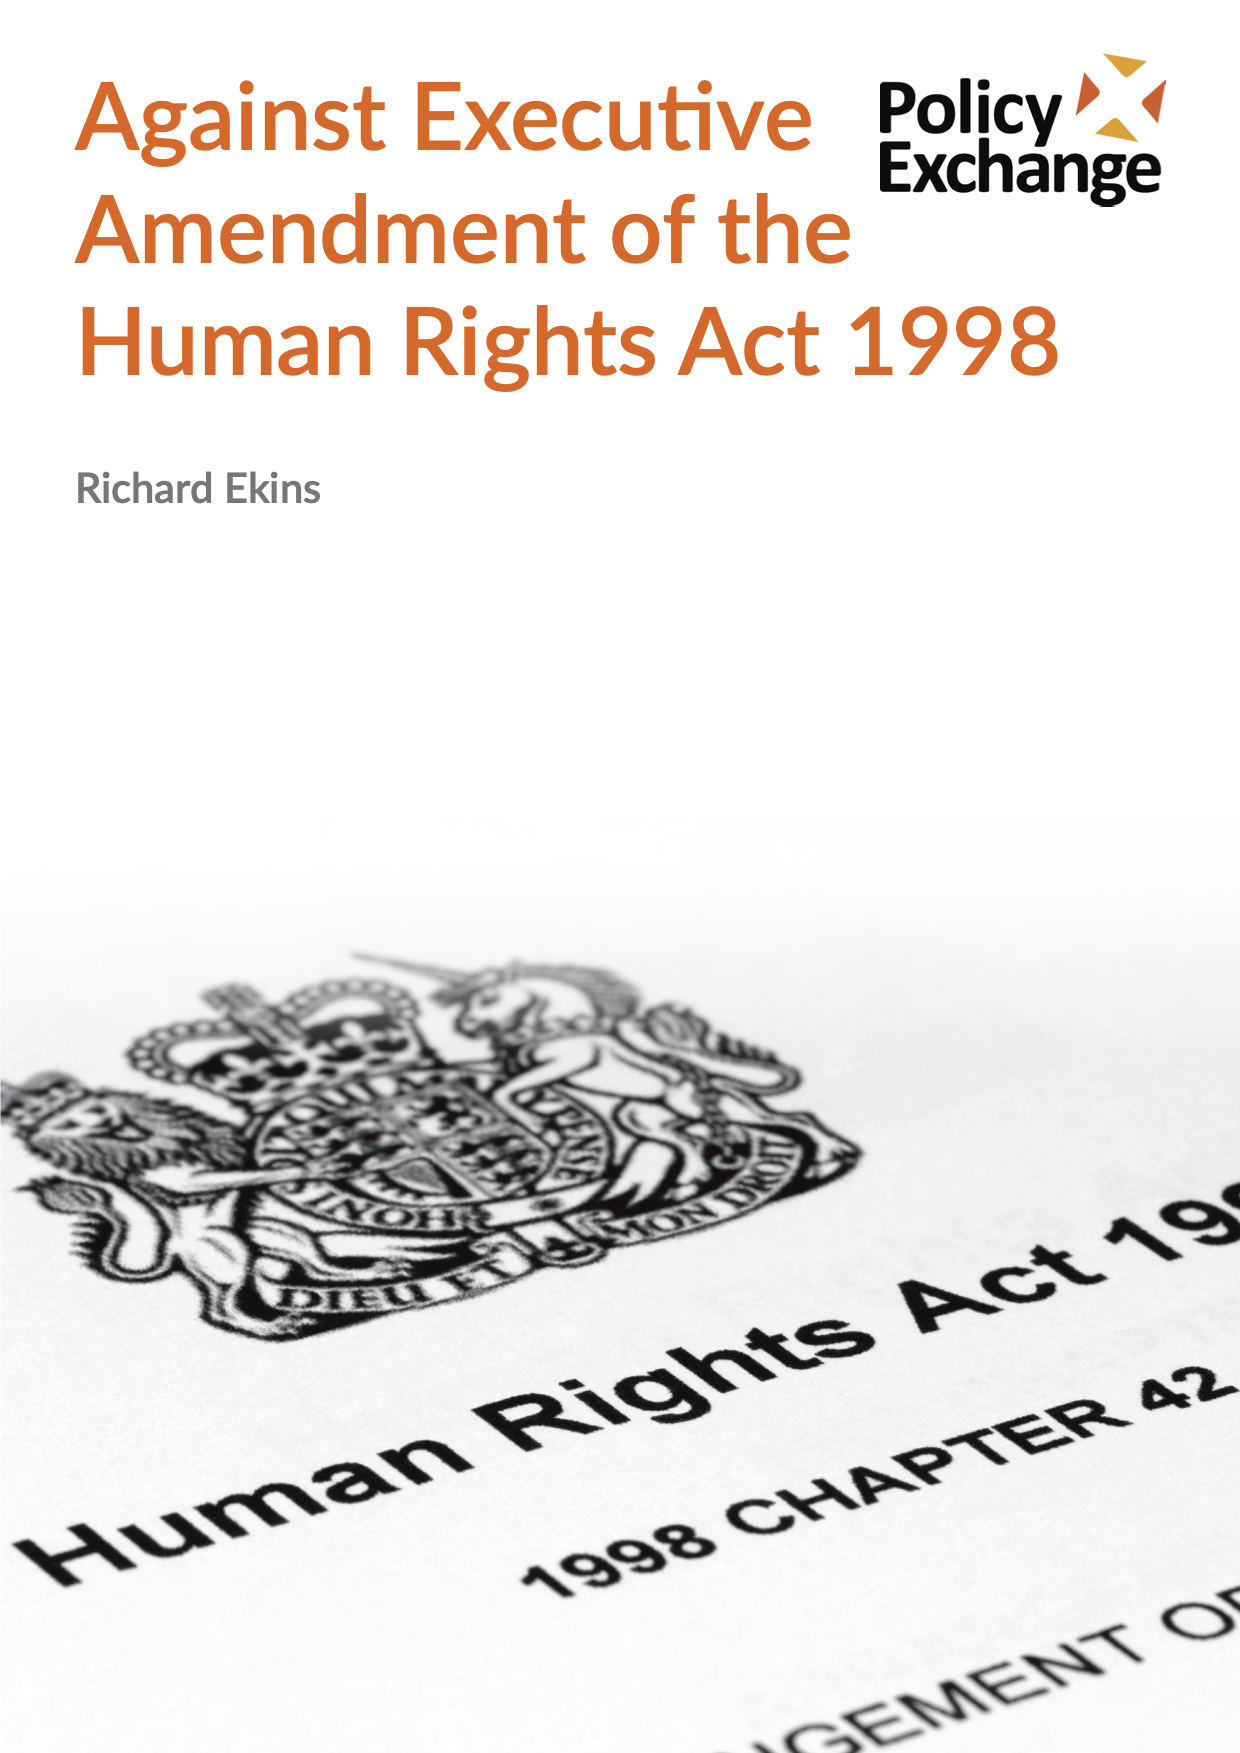 essay on human rights act 1998